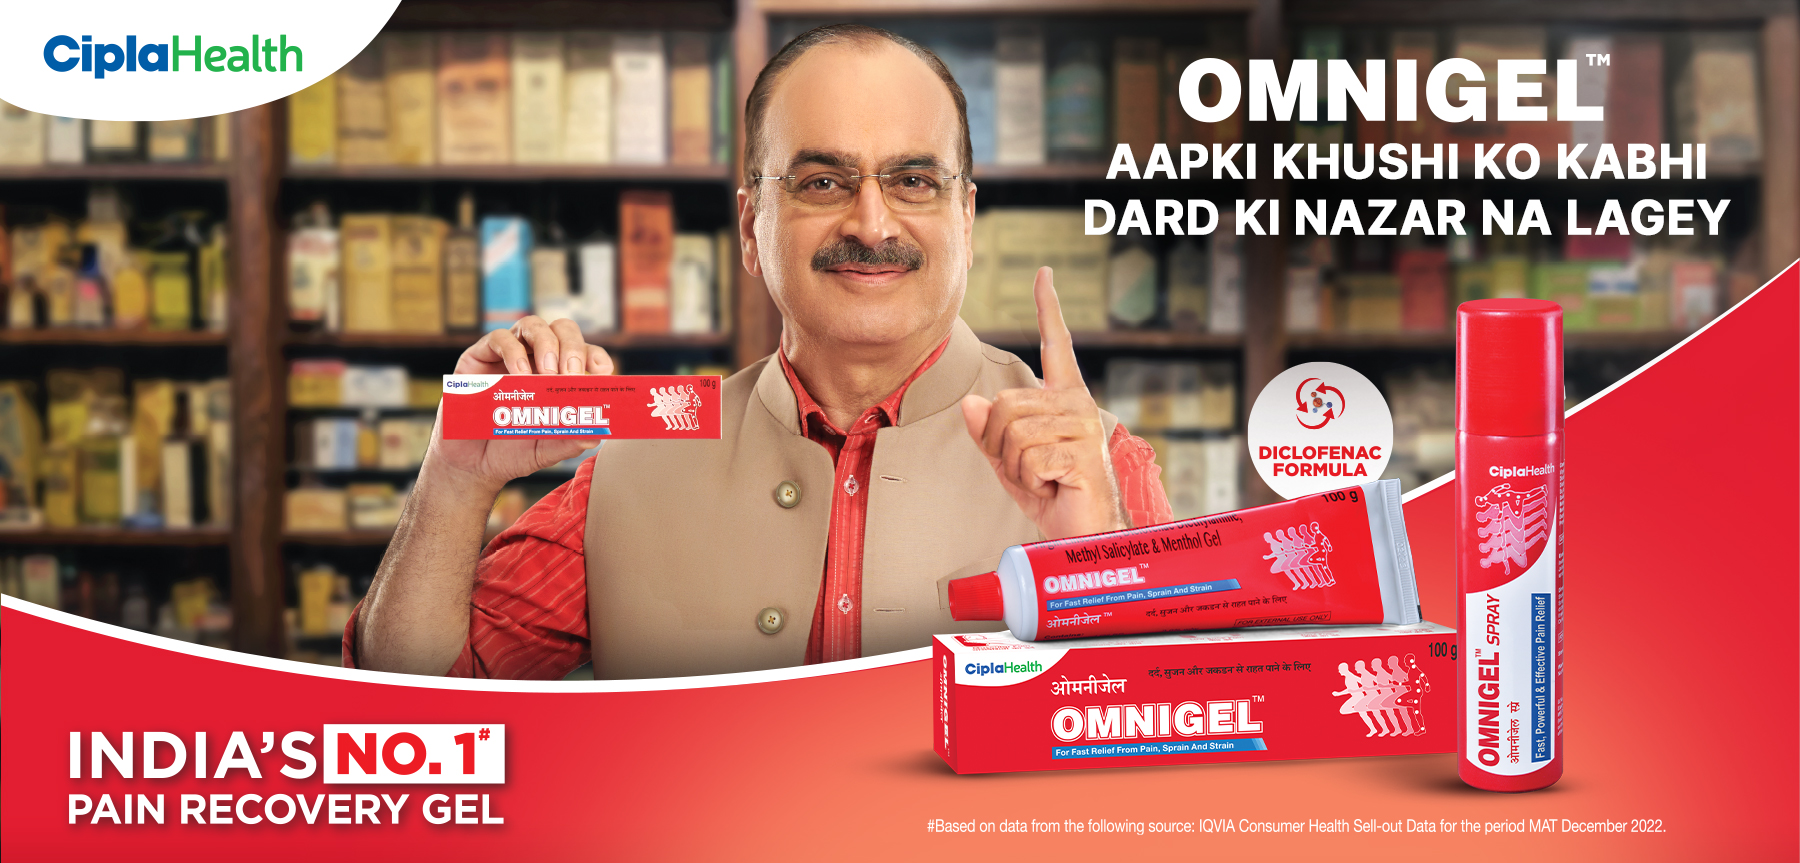 Omnigel pain relief ointment